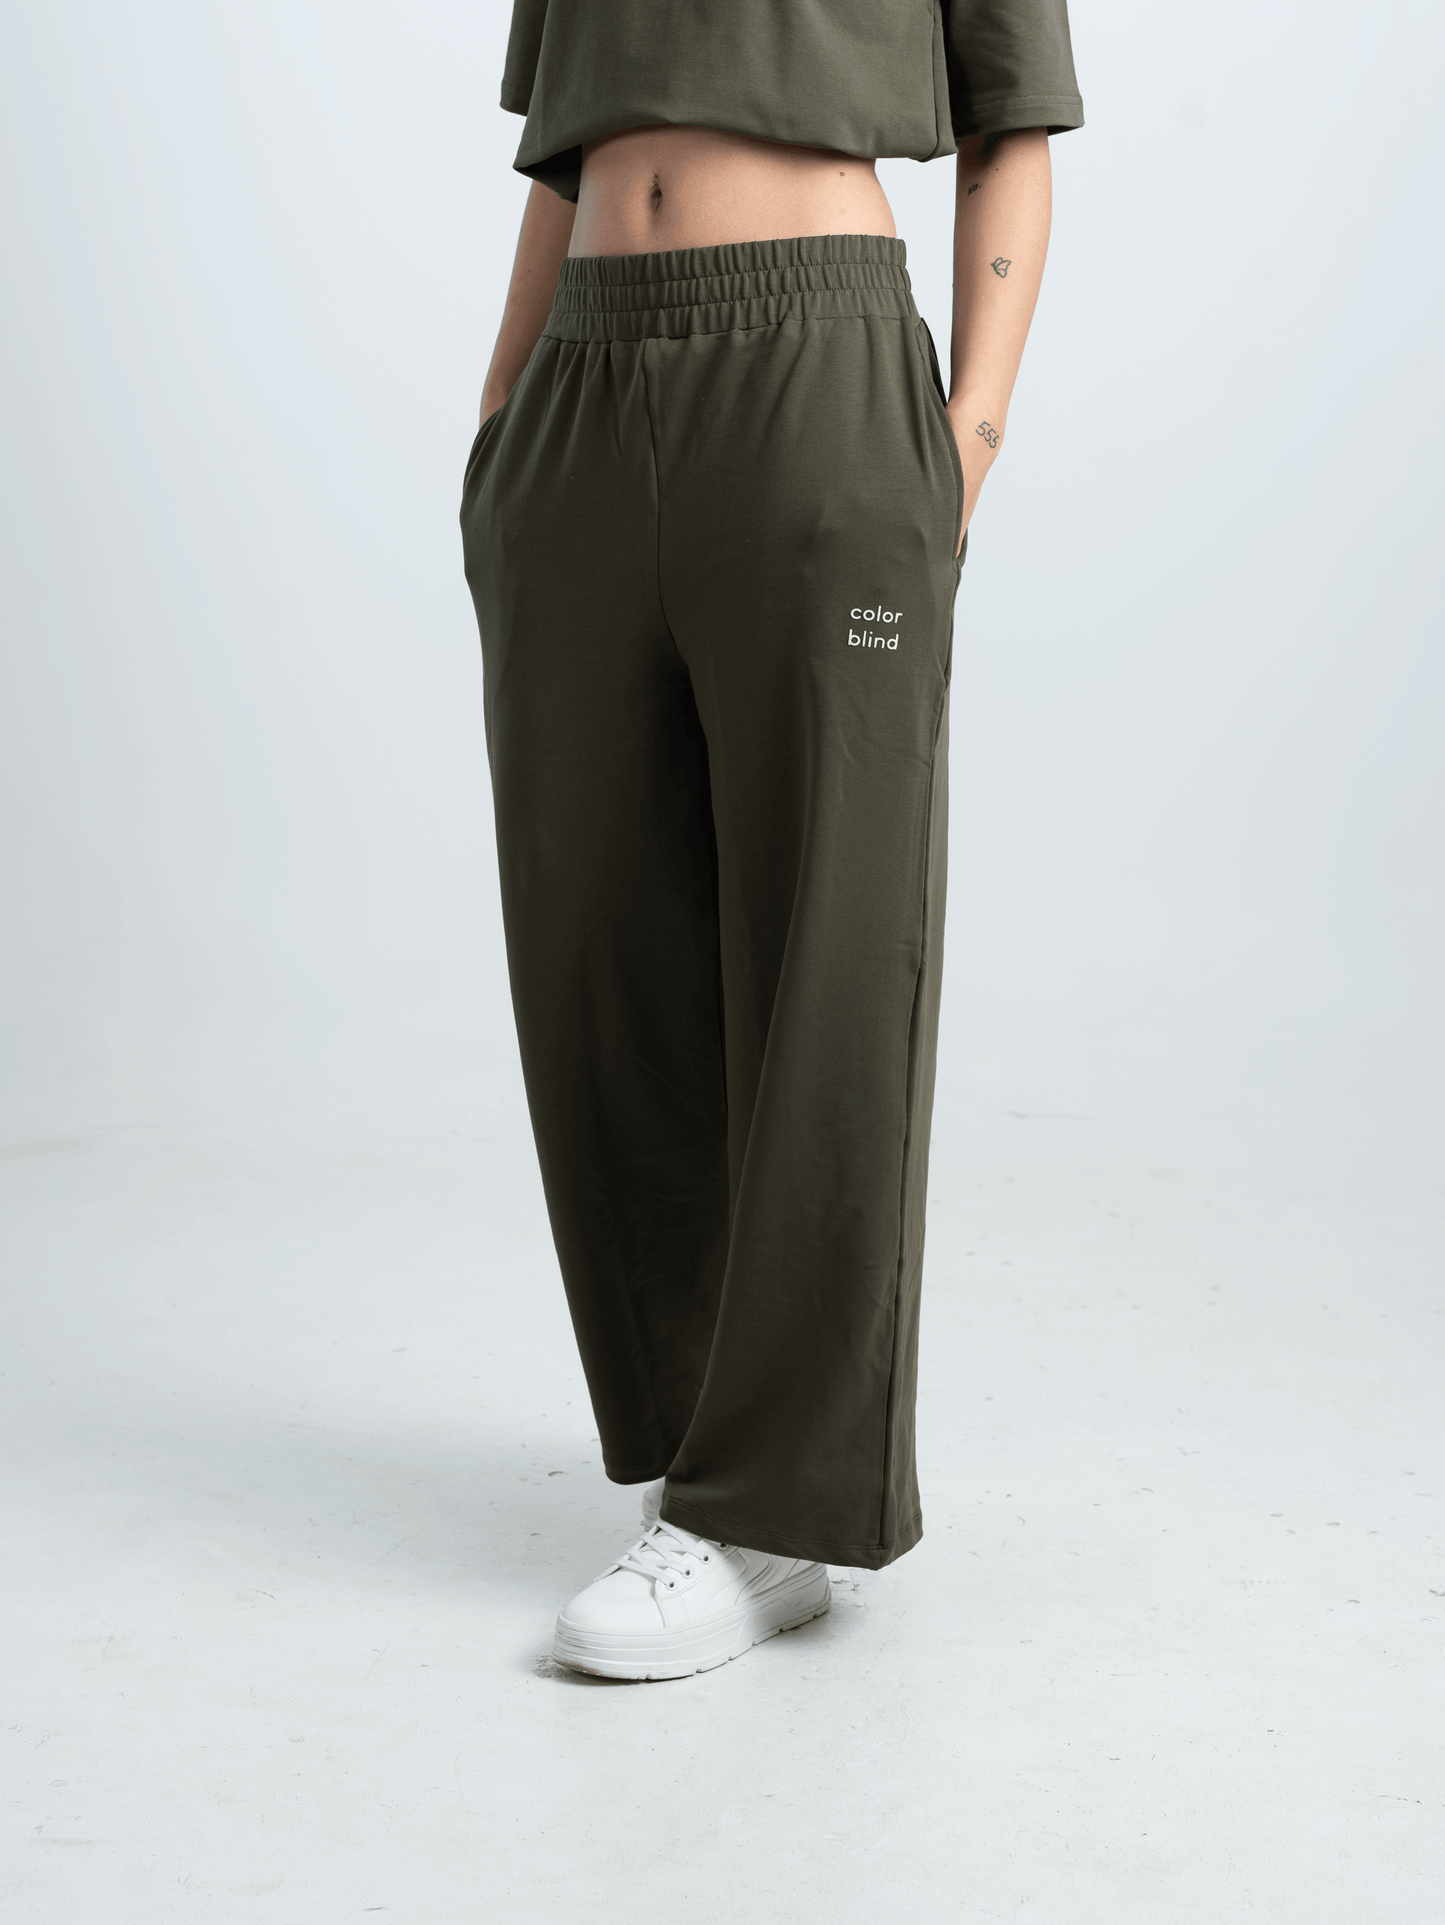 MIDNIGHT GREEN WOMEN'S RELAXED FIT PANTS